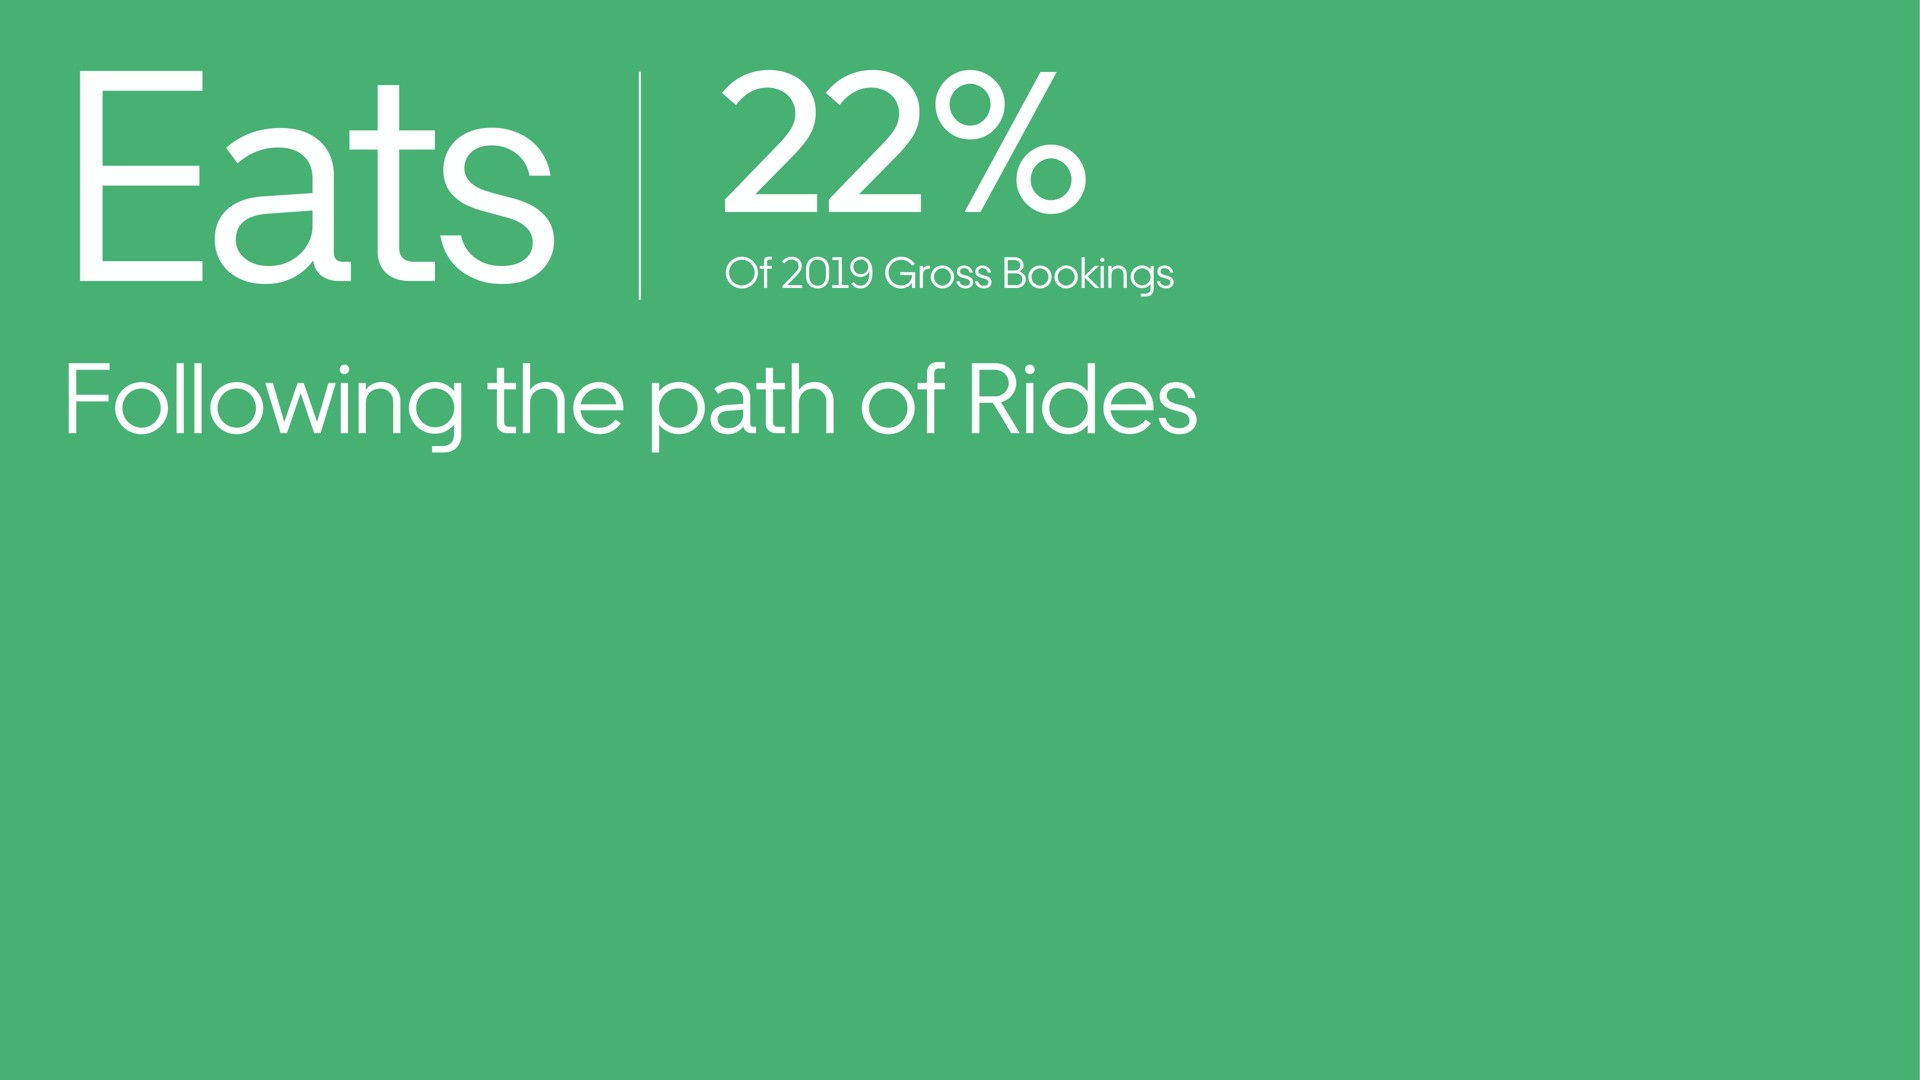 eats following the path of rides | Uber